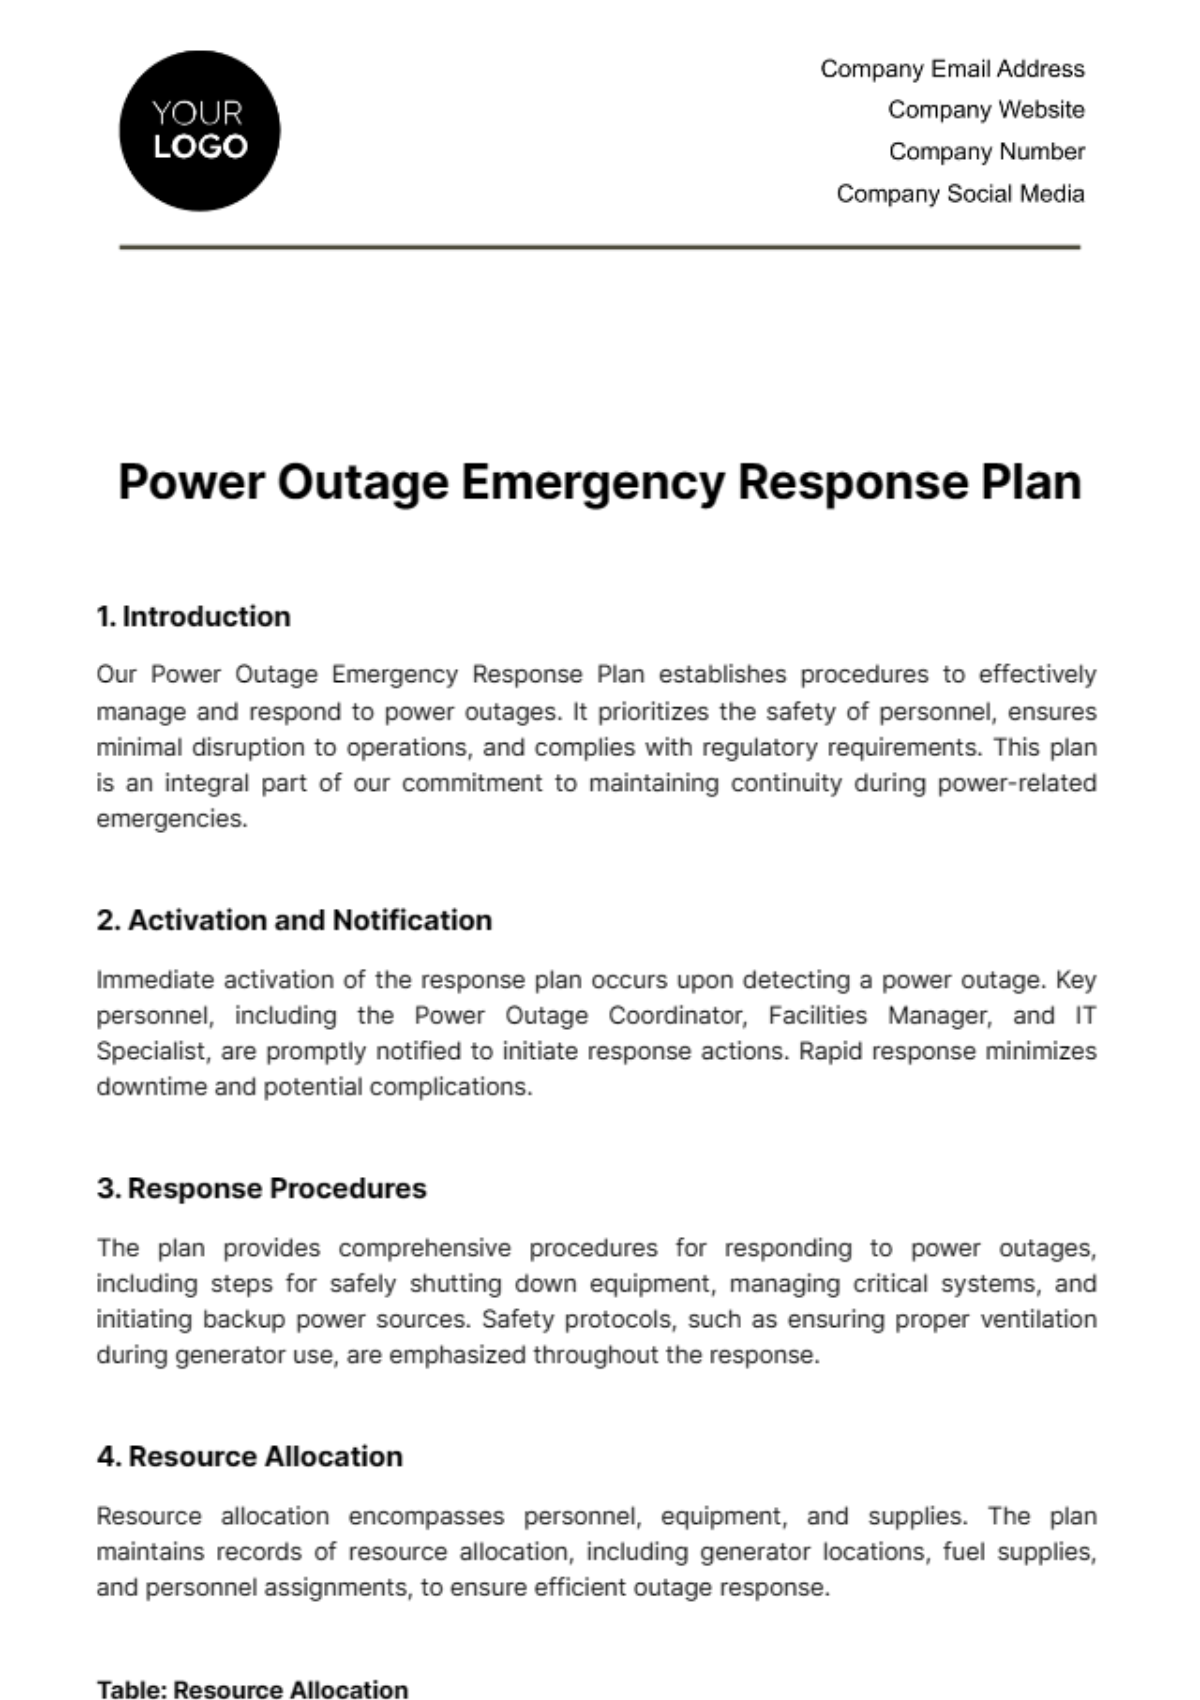 Free Power Outage Emergency Response Plan Template